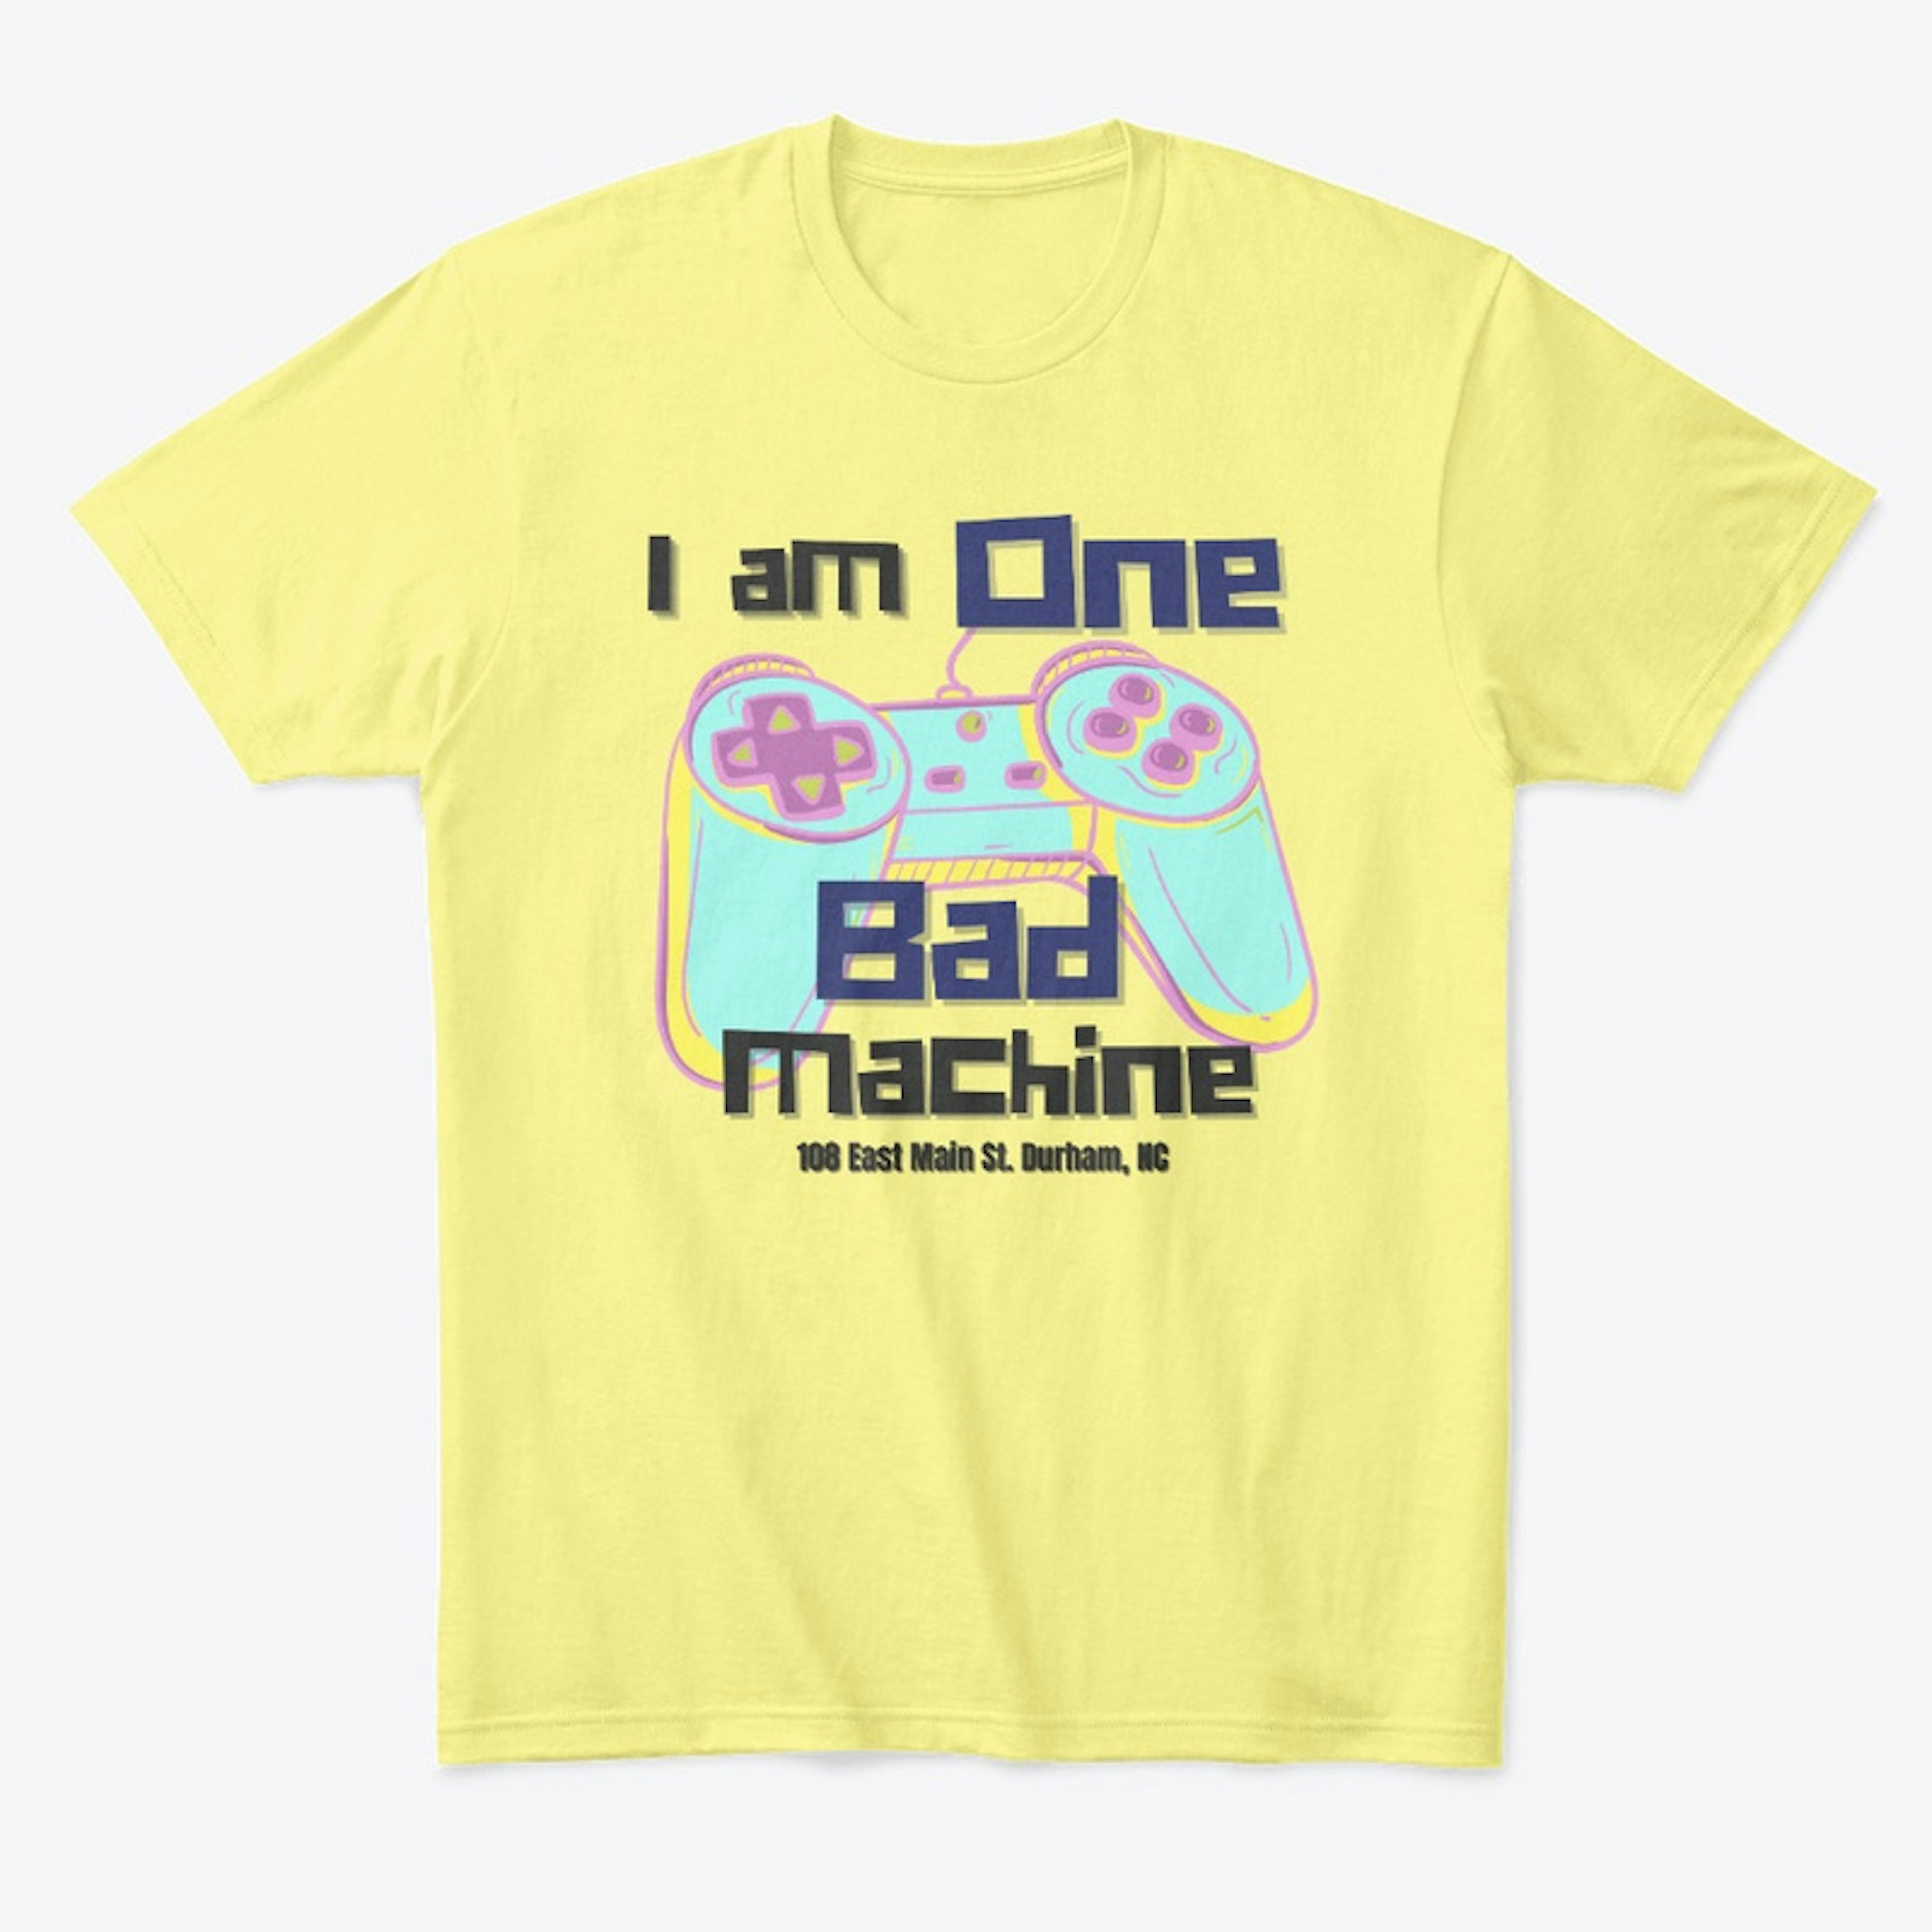 One Bad Machine Collection: Spring